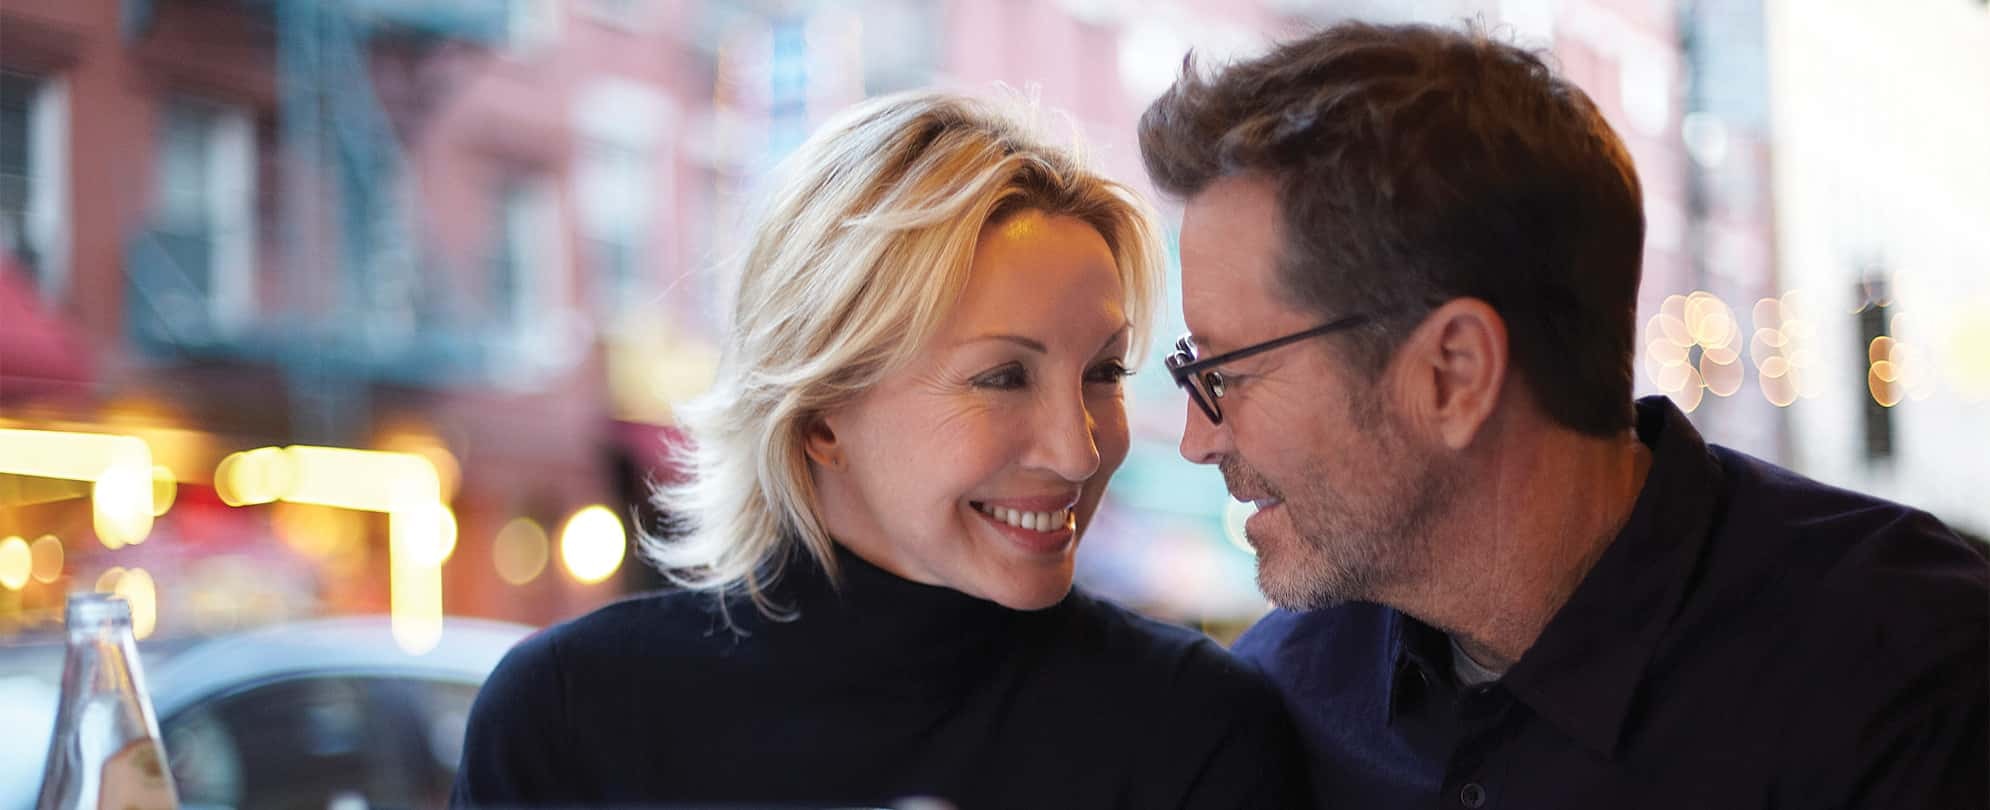 A man wearing glasses and woman in a black turtleneck shirt smile lovingly at each other.